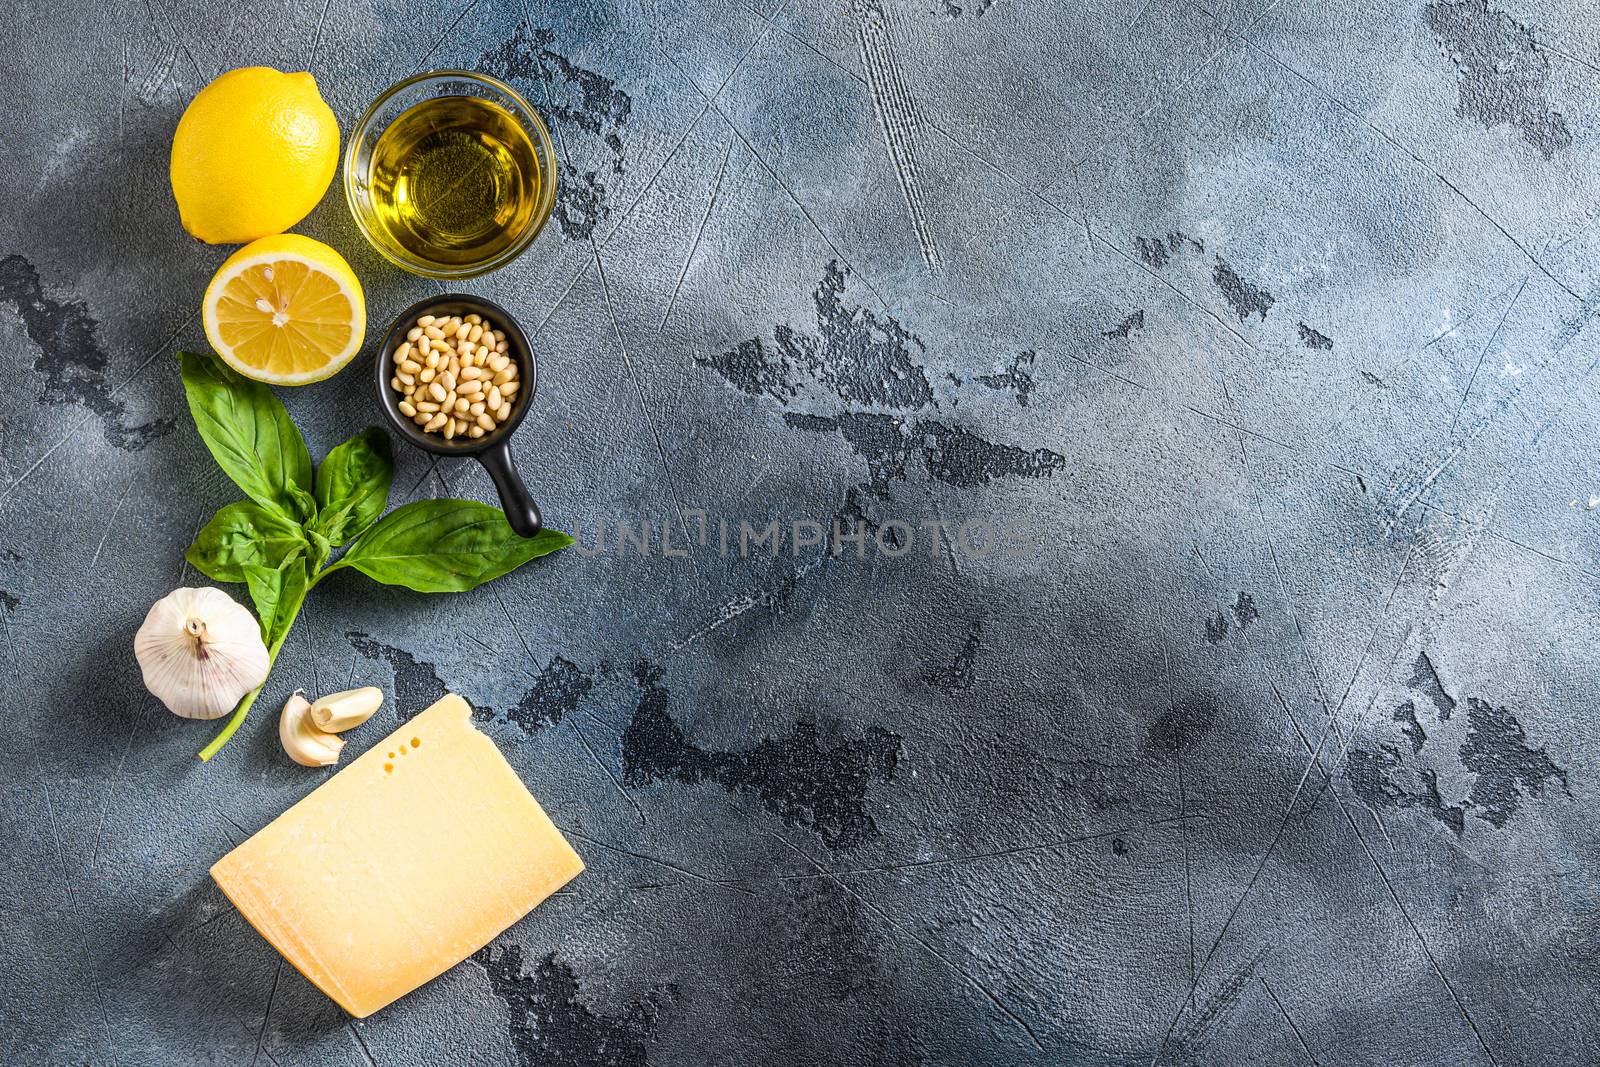 italian ingredients for pesto genovese sauce background, healthy food concept on a vintage stone grey background Basil, olive oil, parmesan, garlic, pine nuts. Top view with copy space by Ilianesolenyi